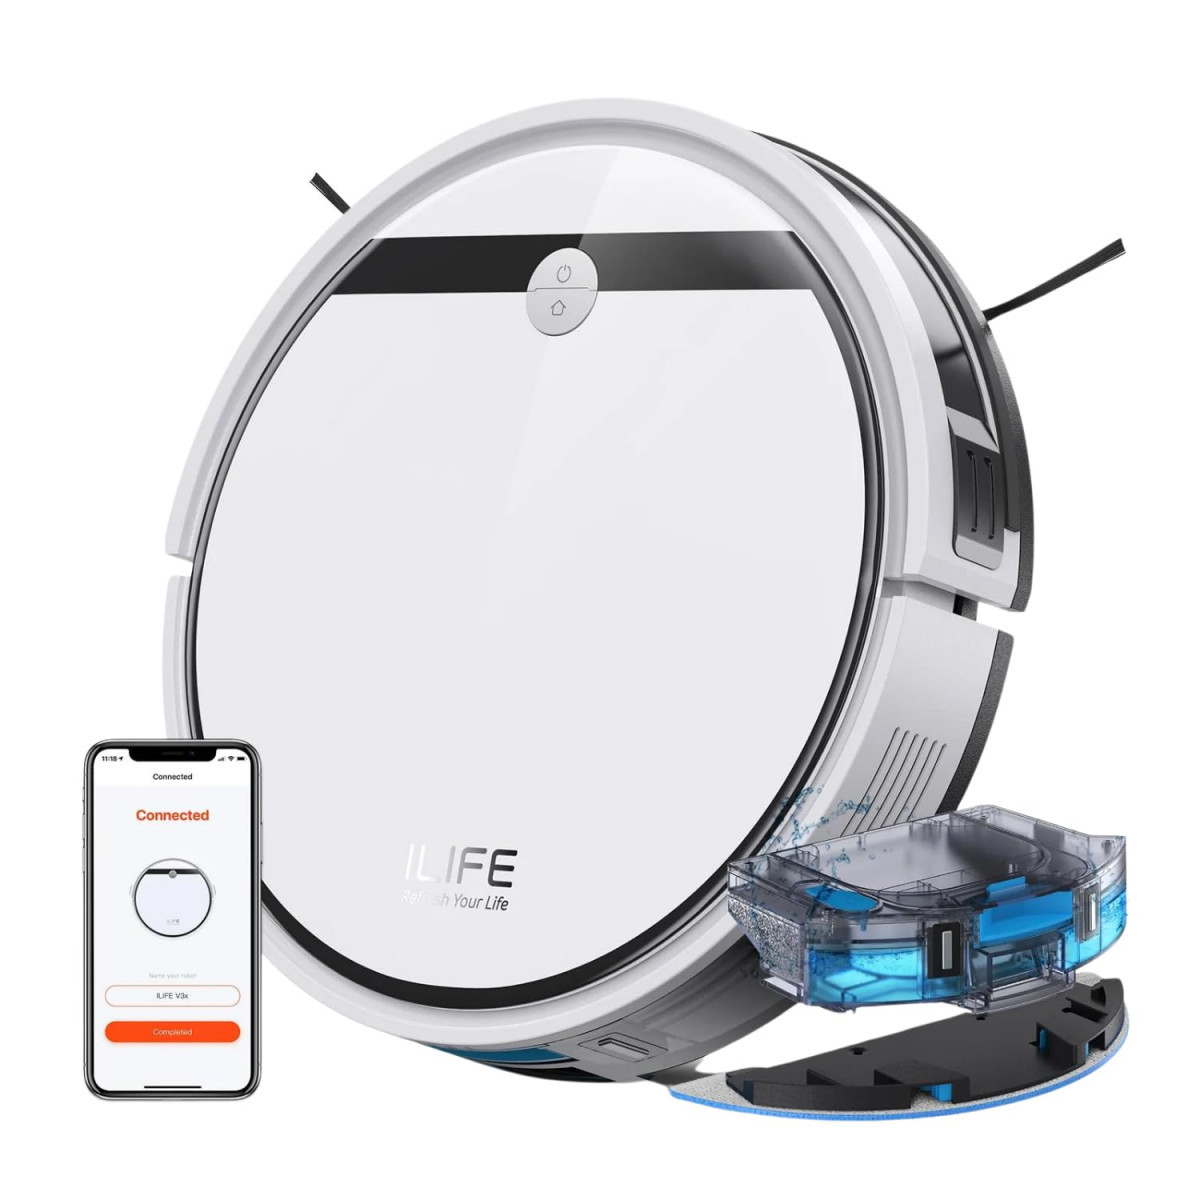 ILIFE V3x Robotic Vacuum Cleaner Powerful Suction Daily Schedule Cleaning Ideal for Hard Floor Hairs and Low Pile CarpetVacuum and Mop White